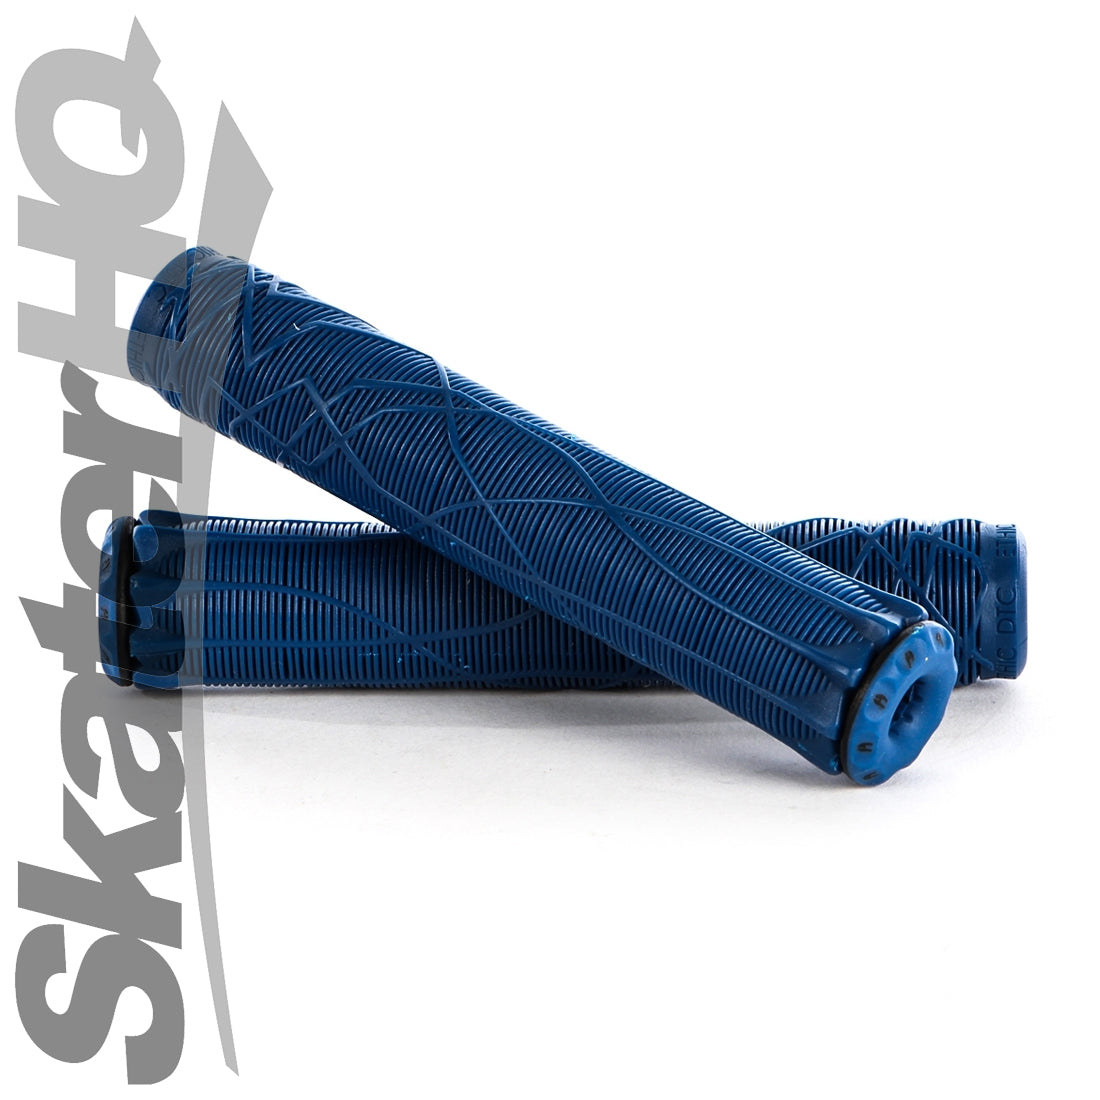 Ethic DTC Handle Grips - Blue Scooter Grips